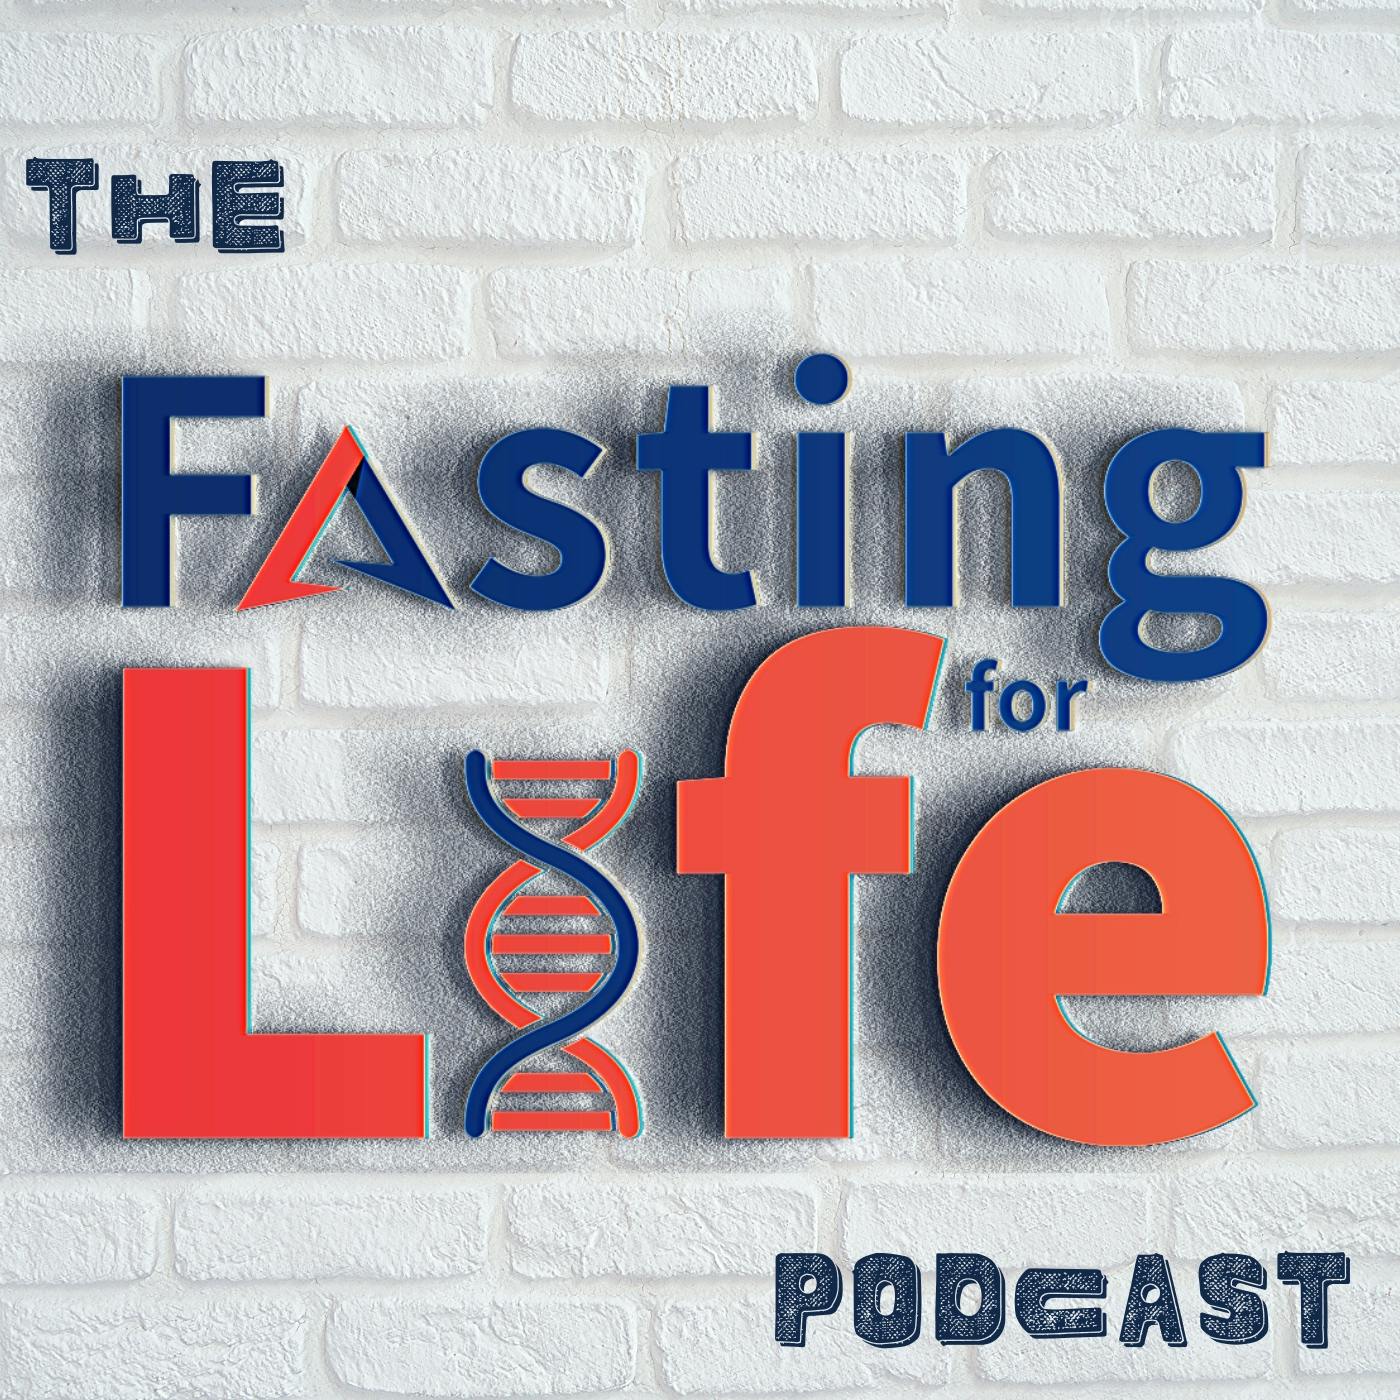 Ep. 159 - CGM, Do I need a Continuous Glucose Monitor for Fasting?, How does apple cider vinegar (acv) affect blood sugar, does creamer in my coffee break a fast?